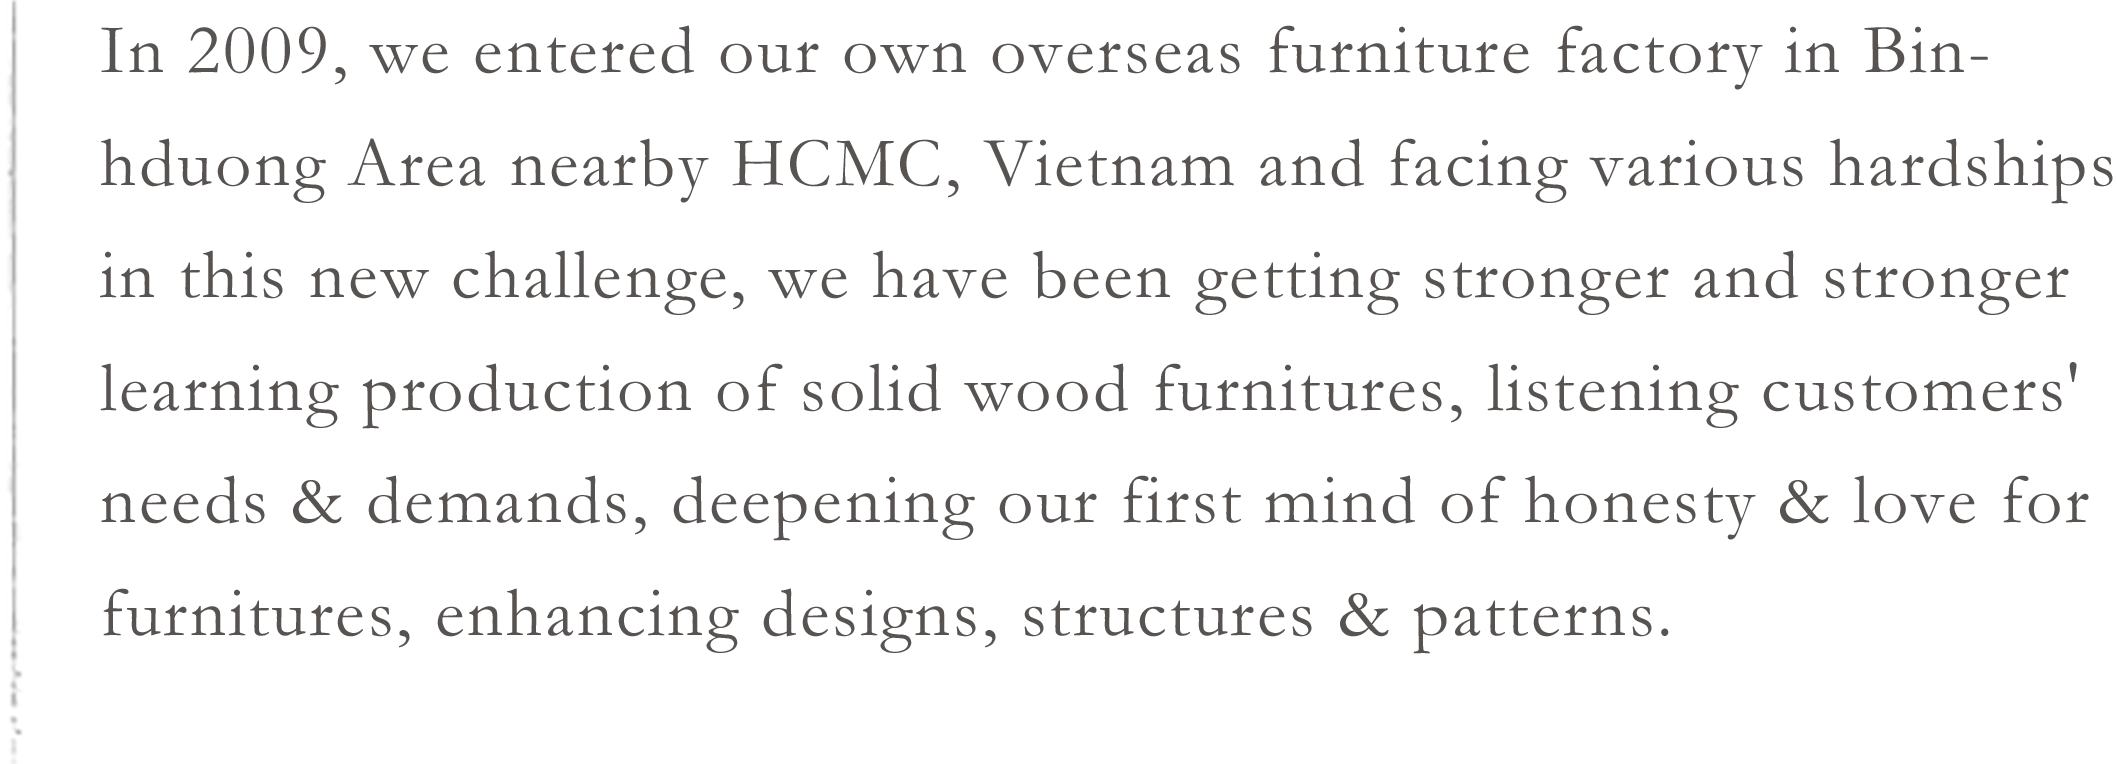 In 2009, we entered our own overseas furniture factory in Binhduong Area nearby HCMC, Vietnam and facing various hardships in this new challenge, we have been getting stronger and stronger learning production of solid wood furnitures, listening customers' needs & demands, deepening our first mind of honesty & love for furnitures, enhancing designs, structures & patterns.